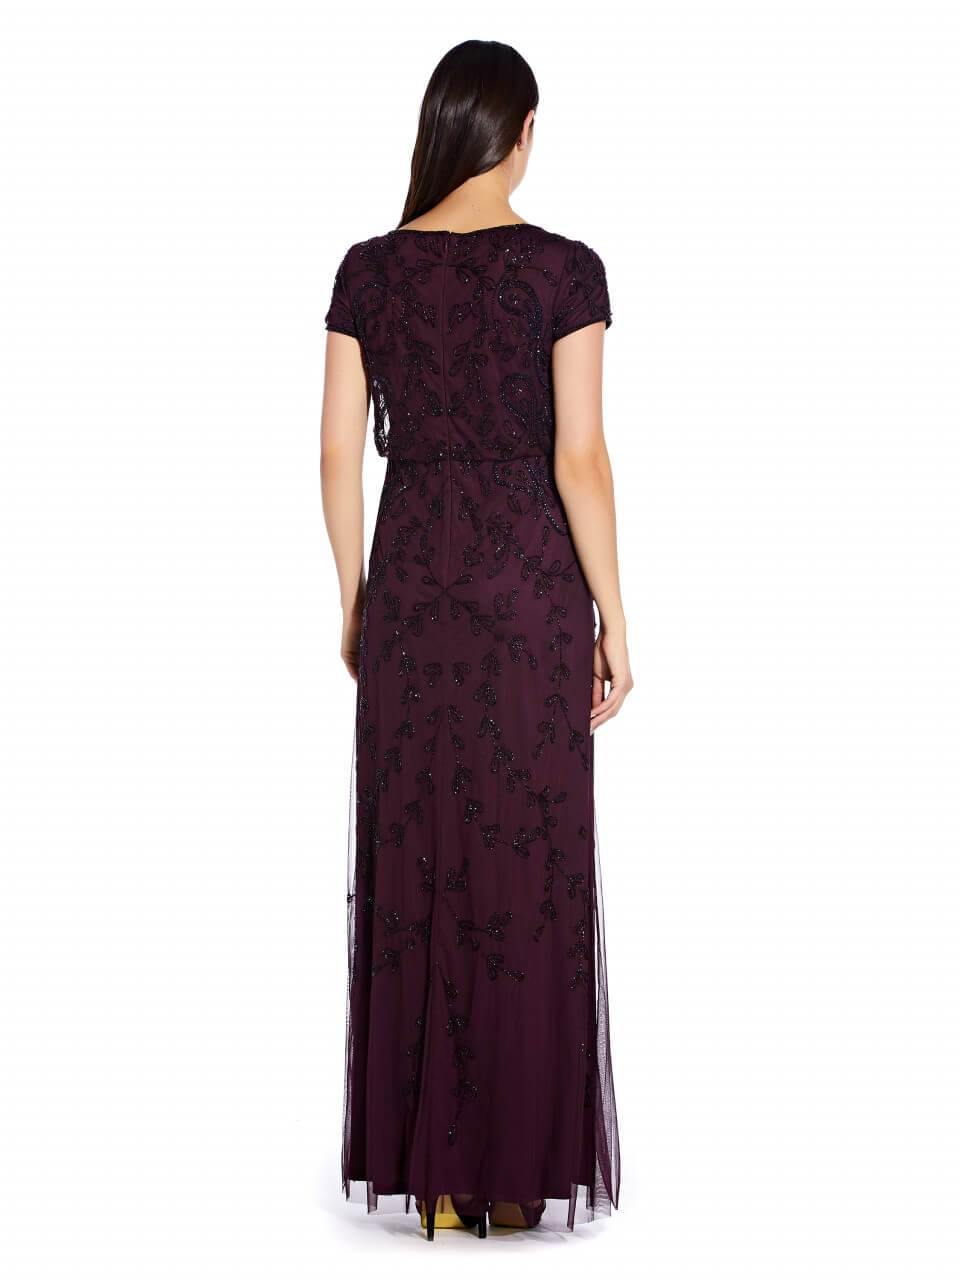 Adrianna Papell Mother of the Bride Long Dress Formal - The Dress Outlet Adrianna Papell